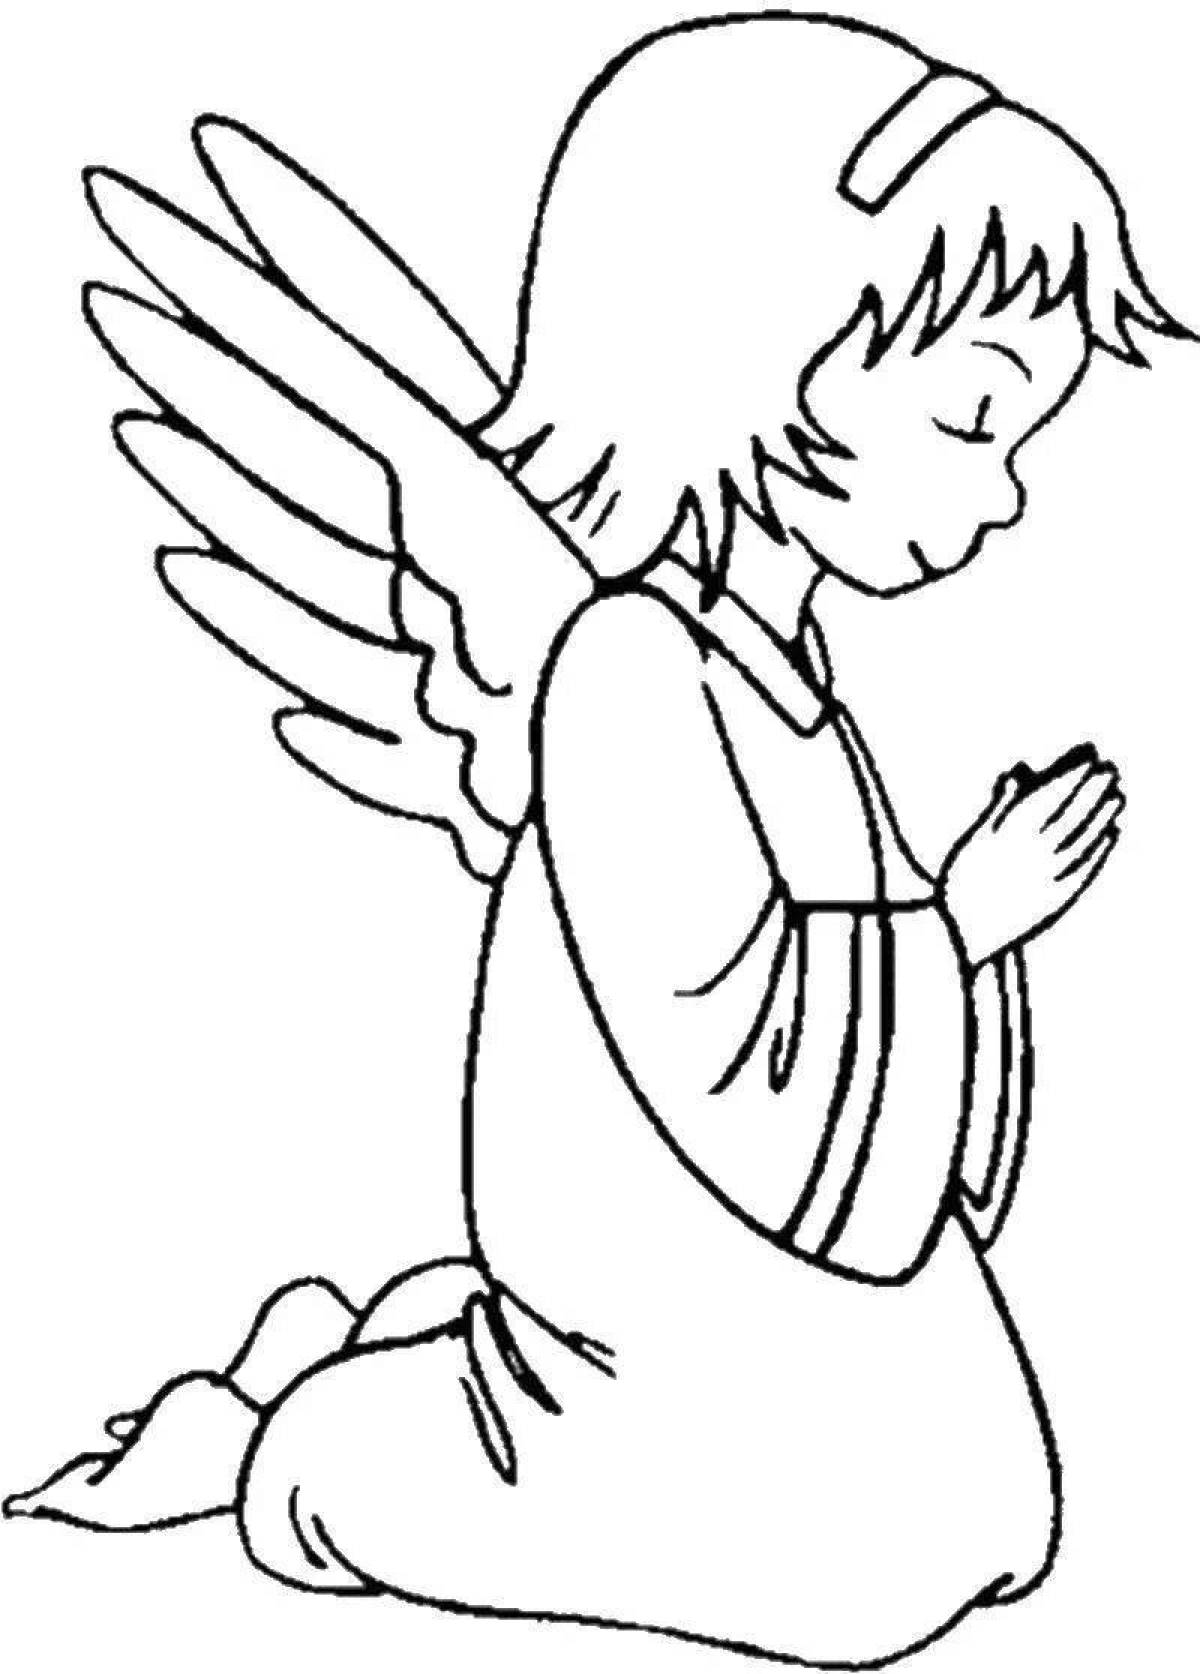 Adorable little angel coloring page